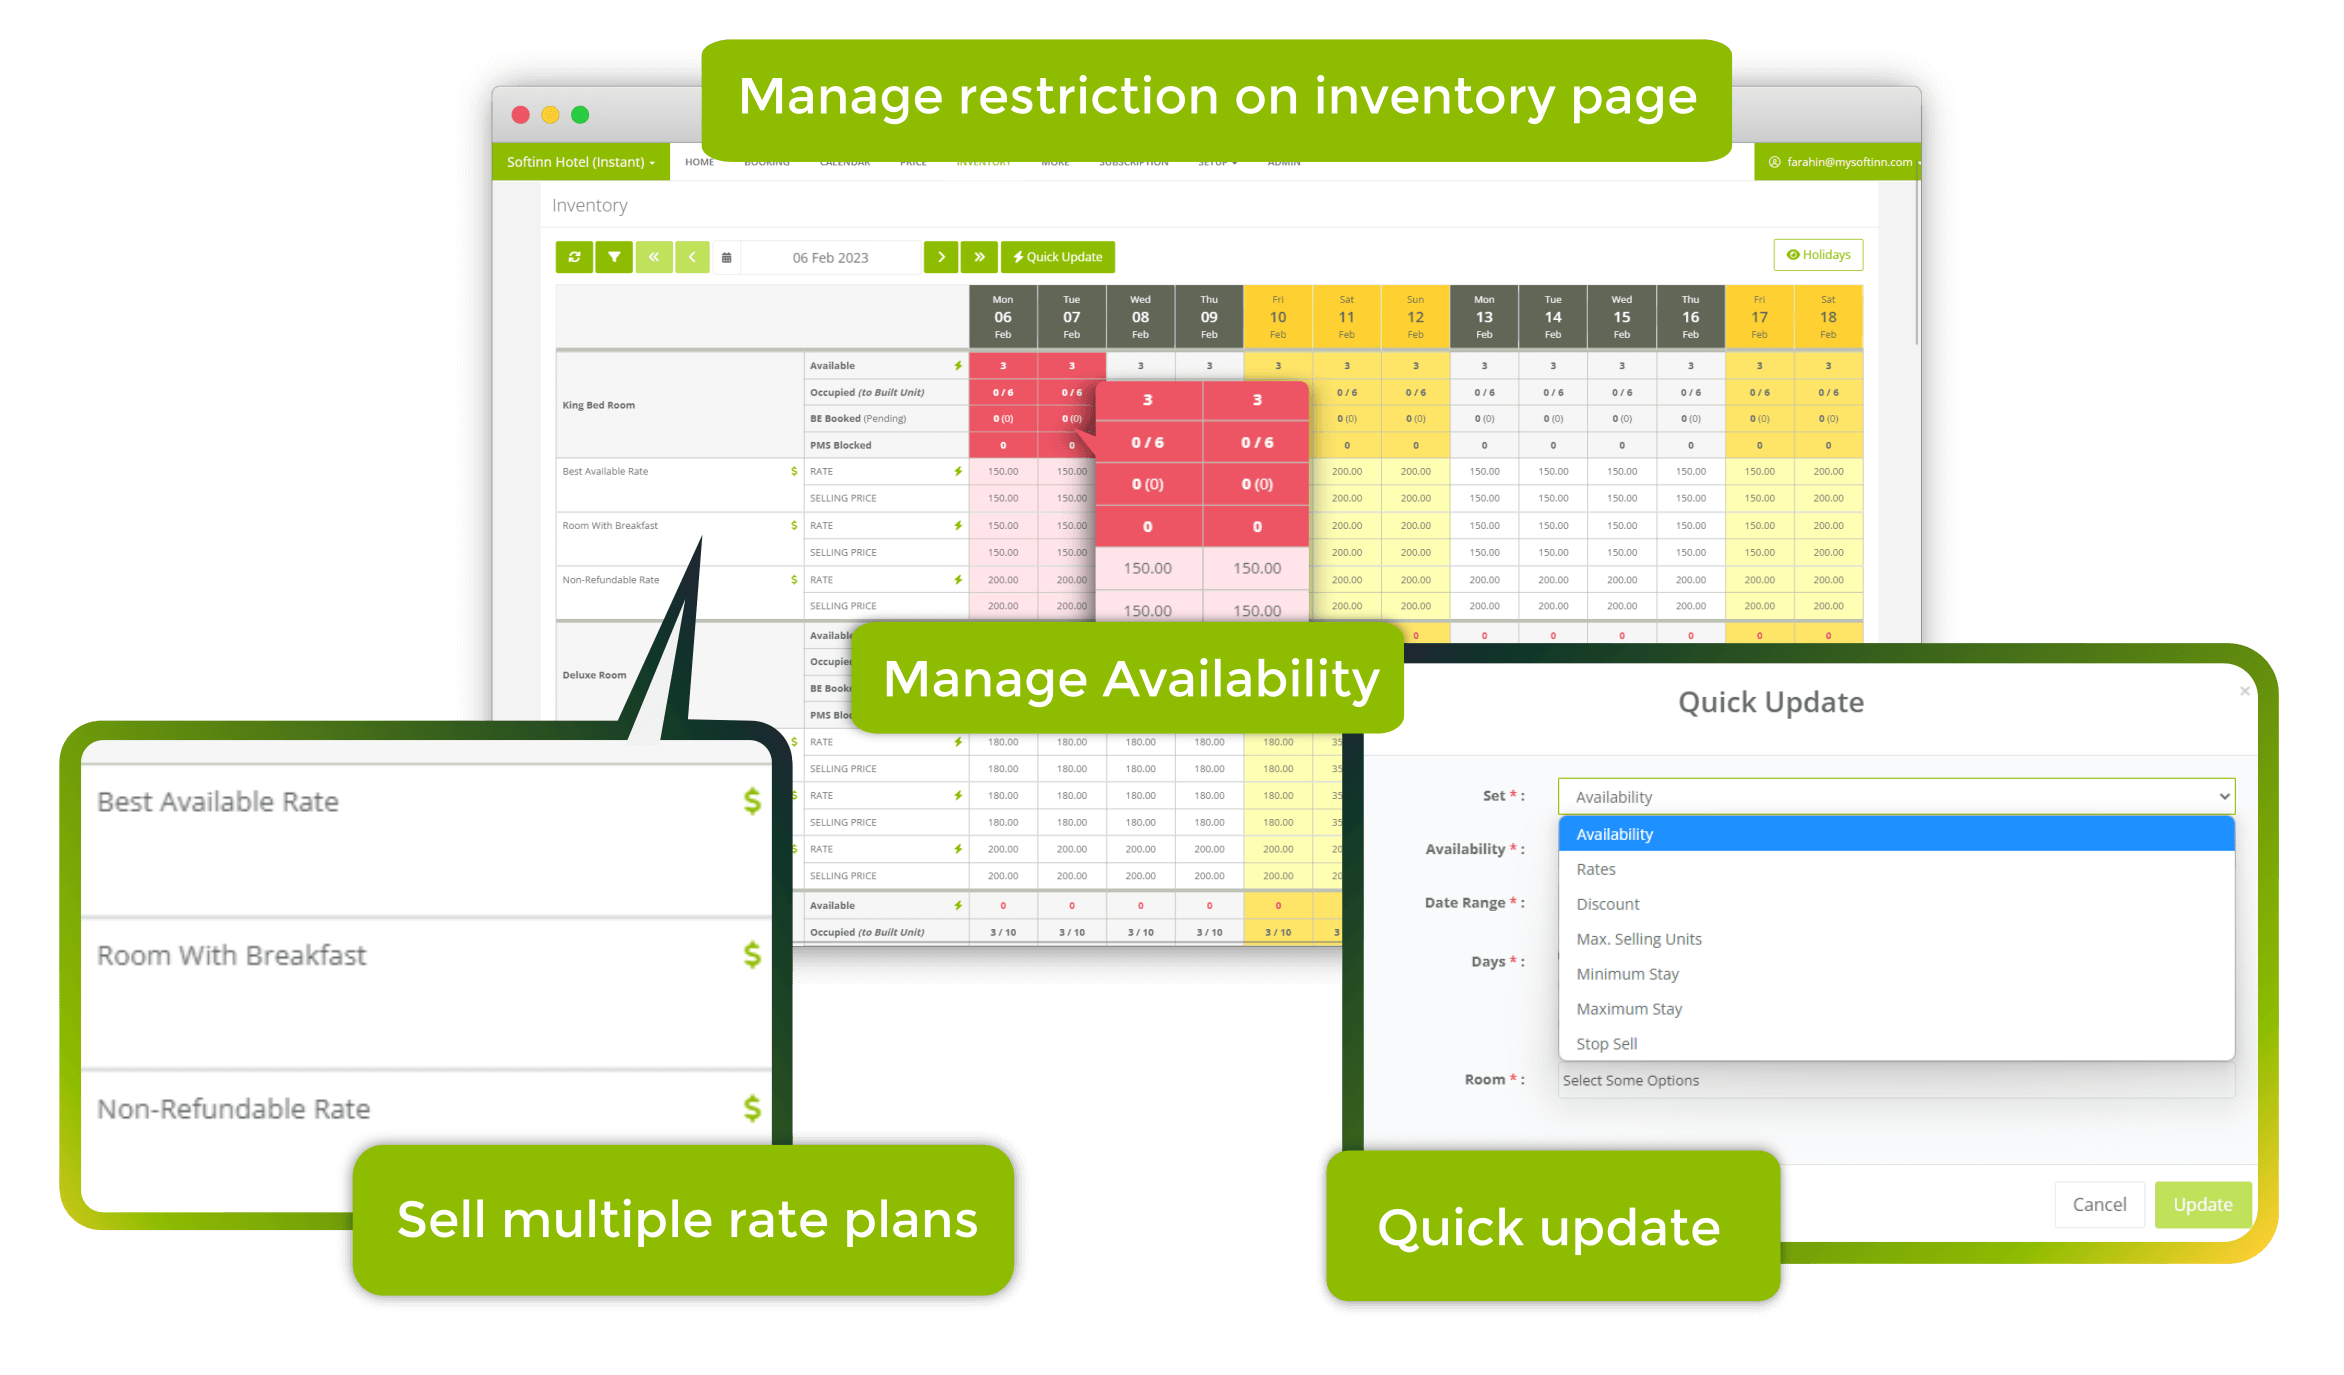 Manage-restriction-on-inventory